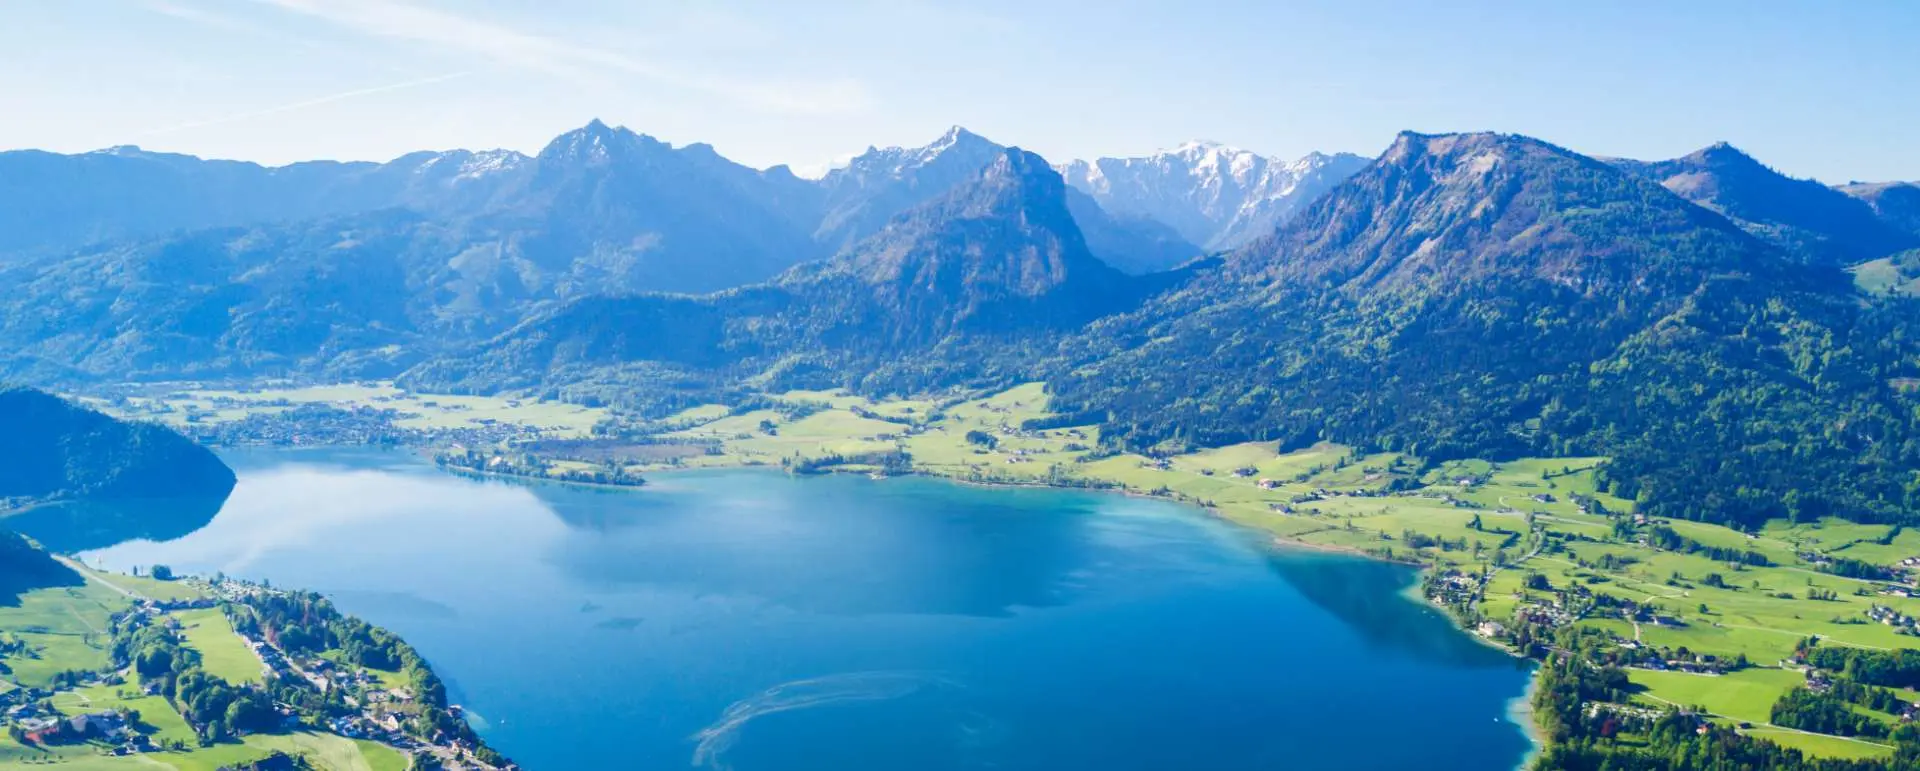 Wolfgangsee Lake - the destination for groups